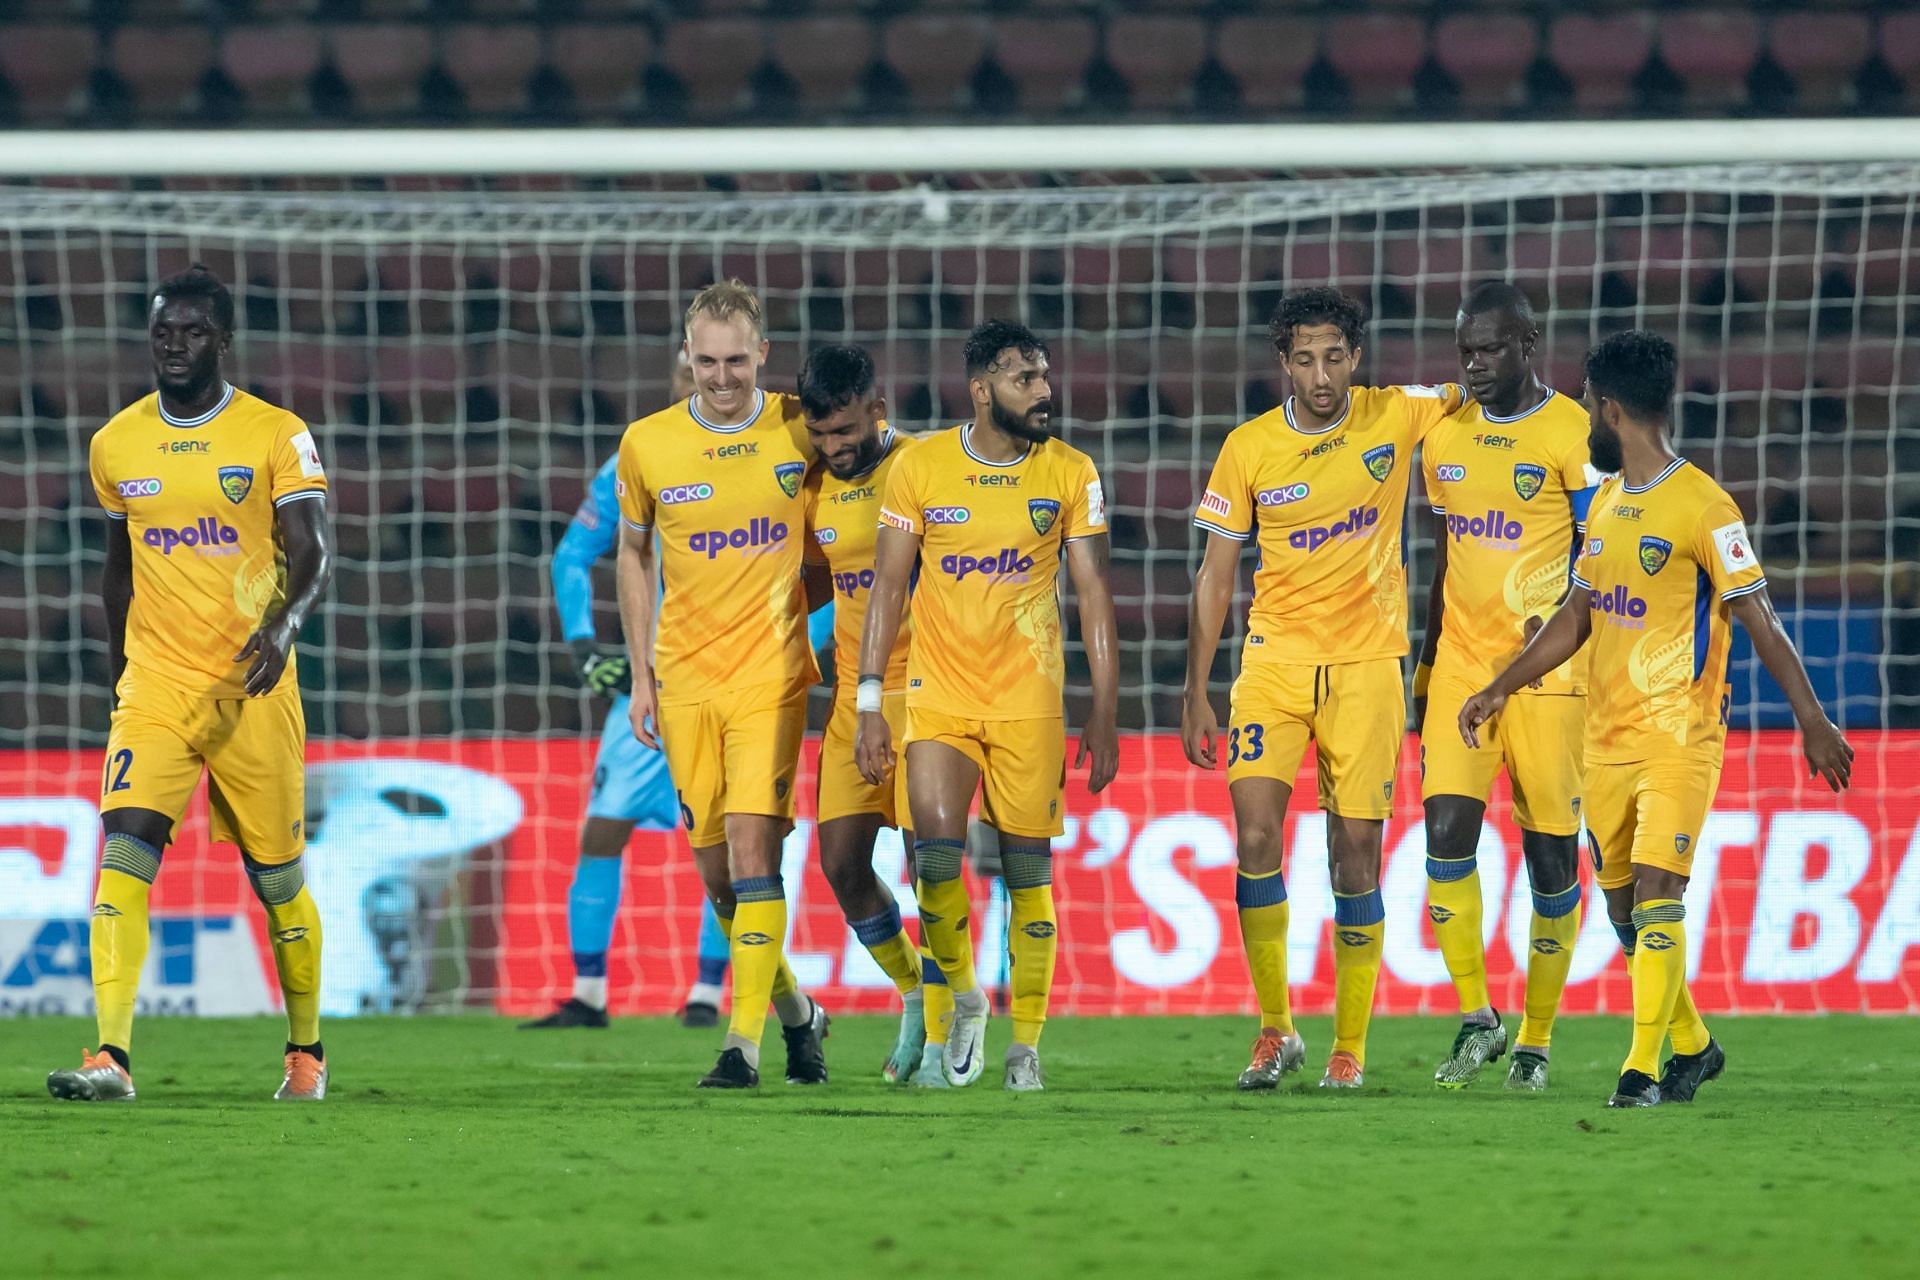 Chennaiyin FC are seventh in the ISL league standings.